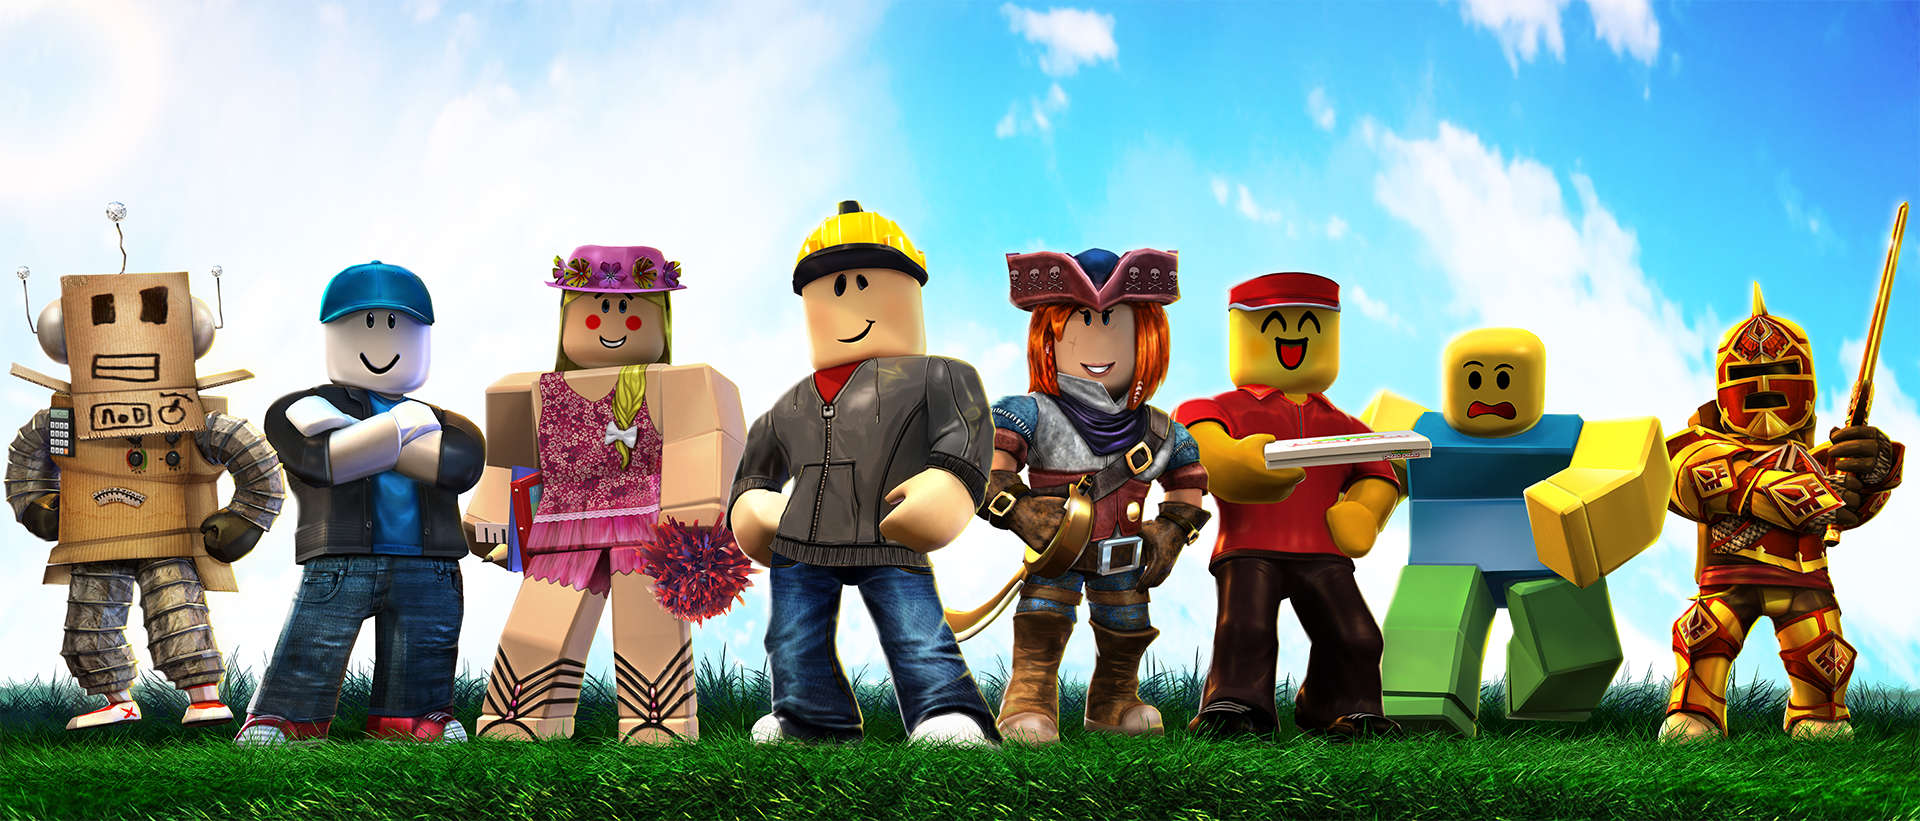 Roblox Raises 150 Million In Funding Is Now Reportedly Worth 2 5 Billion - online 150m venture 4b roblox